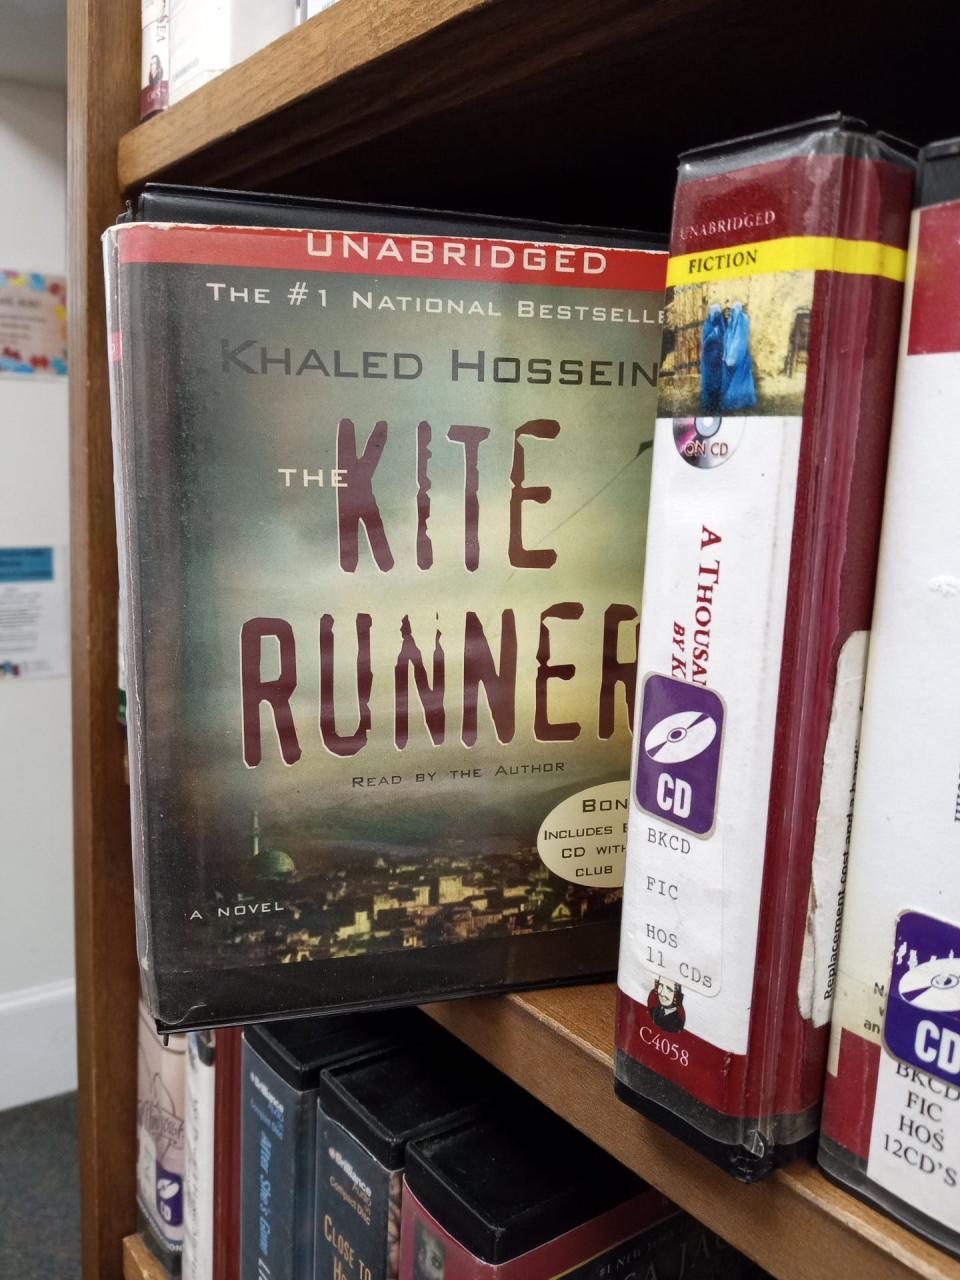 The Kite Runner, by Khaled Hosseini, one of the five books some Wallenpaupack school parents with which they have concerns, is available as an audio book at Wayne County Public Library. Four of the five books can be found among the seven public libraries under Wayne Library Alliance, except for We are the Ants.